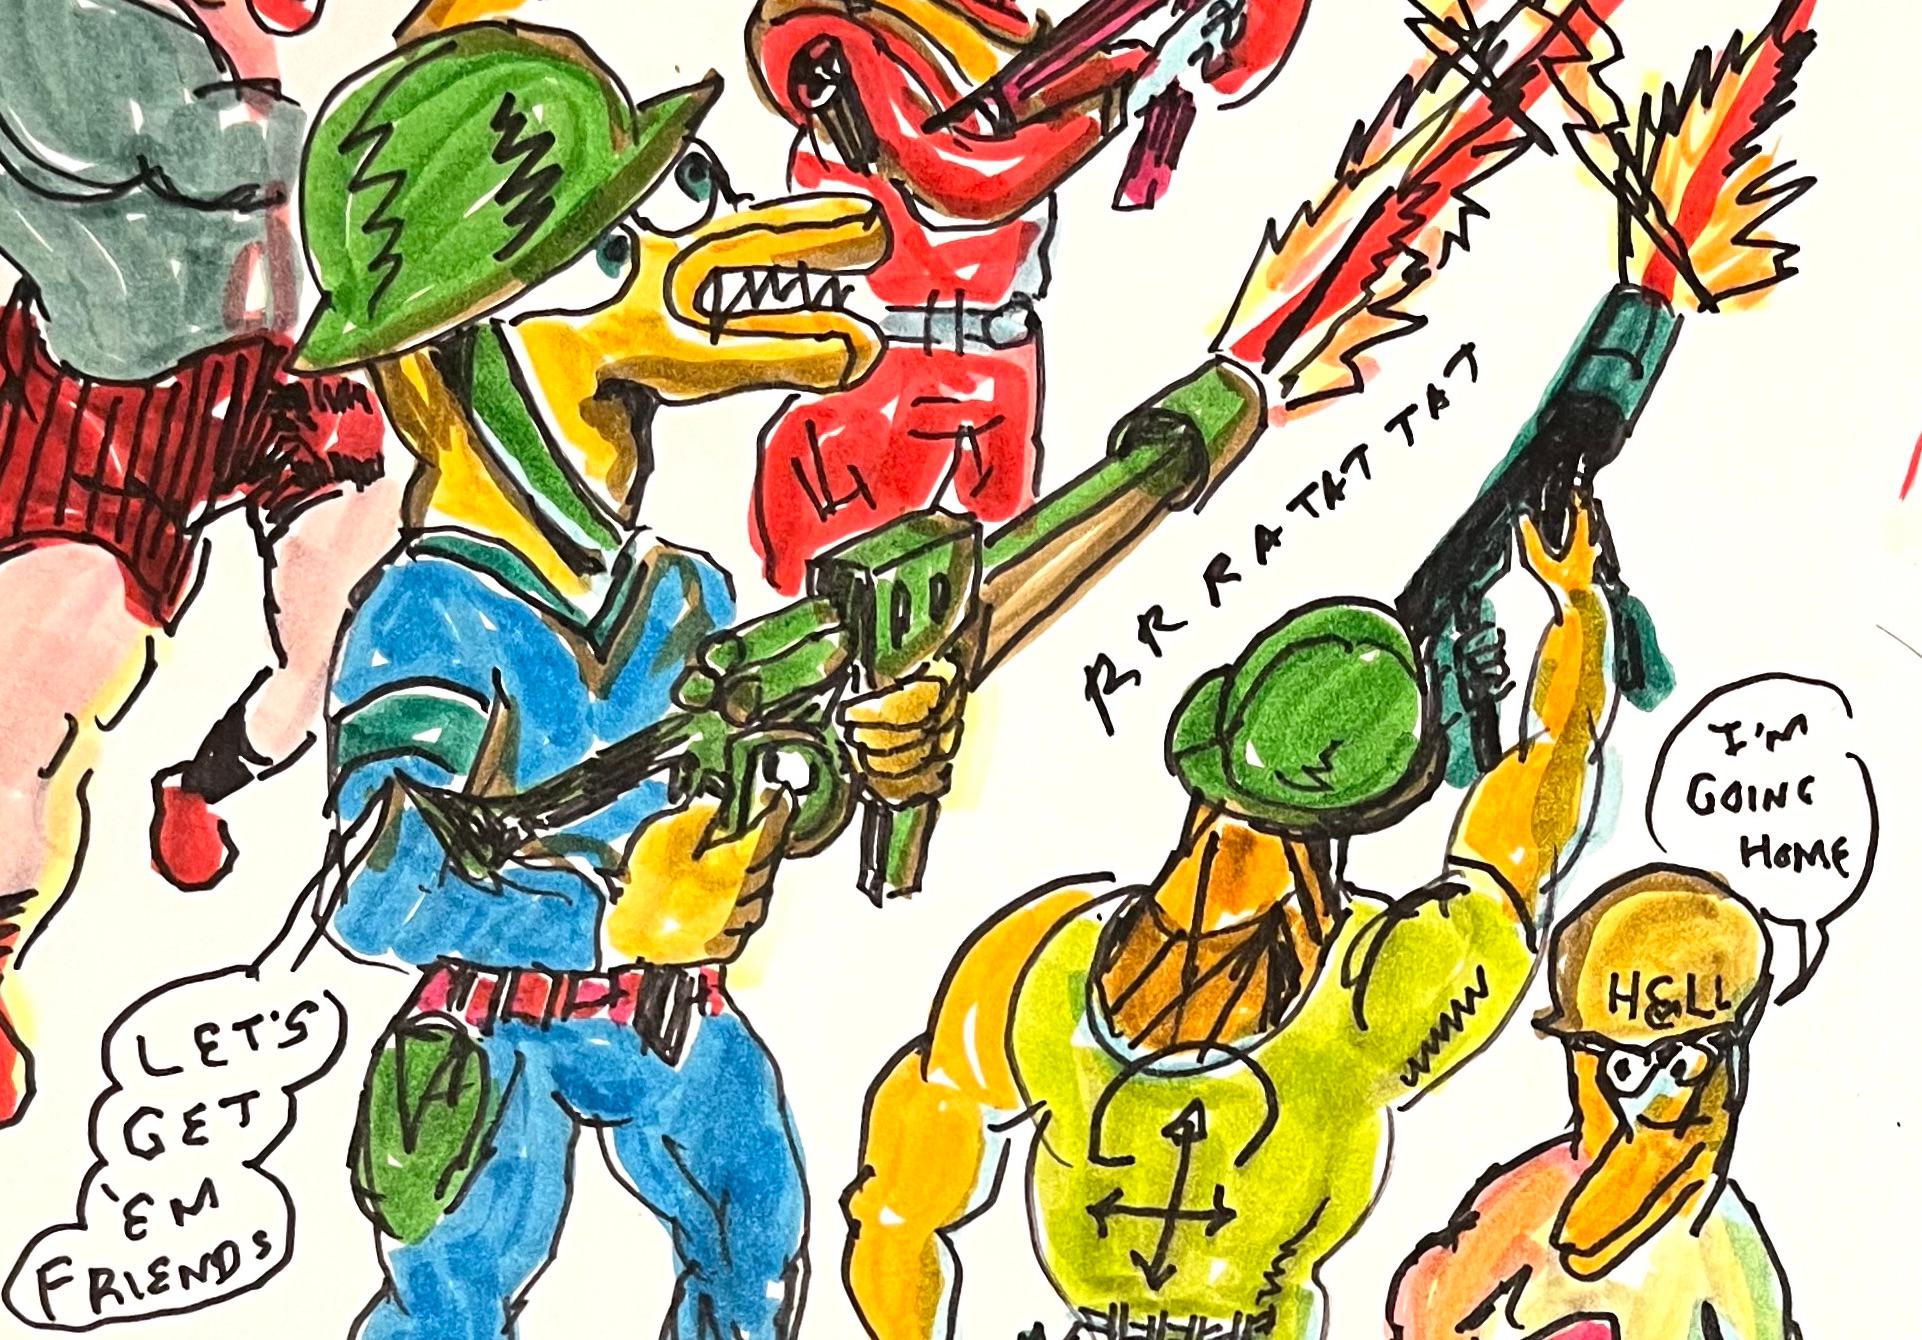 Hank - Daniel Johnston, Colorful Figurative Ink Drawing, Duck Wars Series For Sale 2